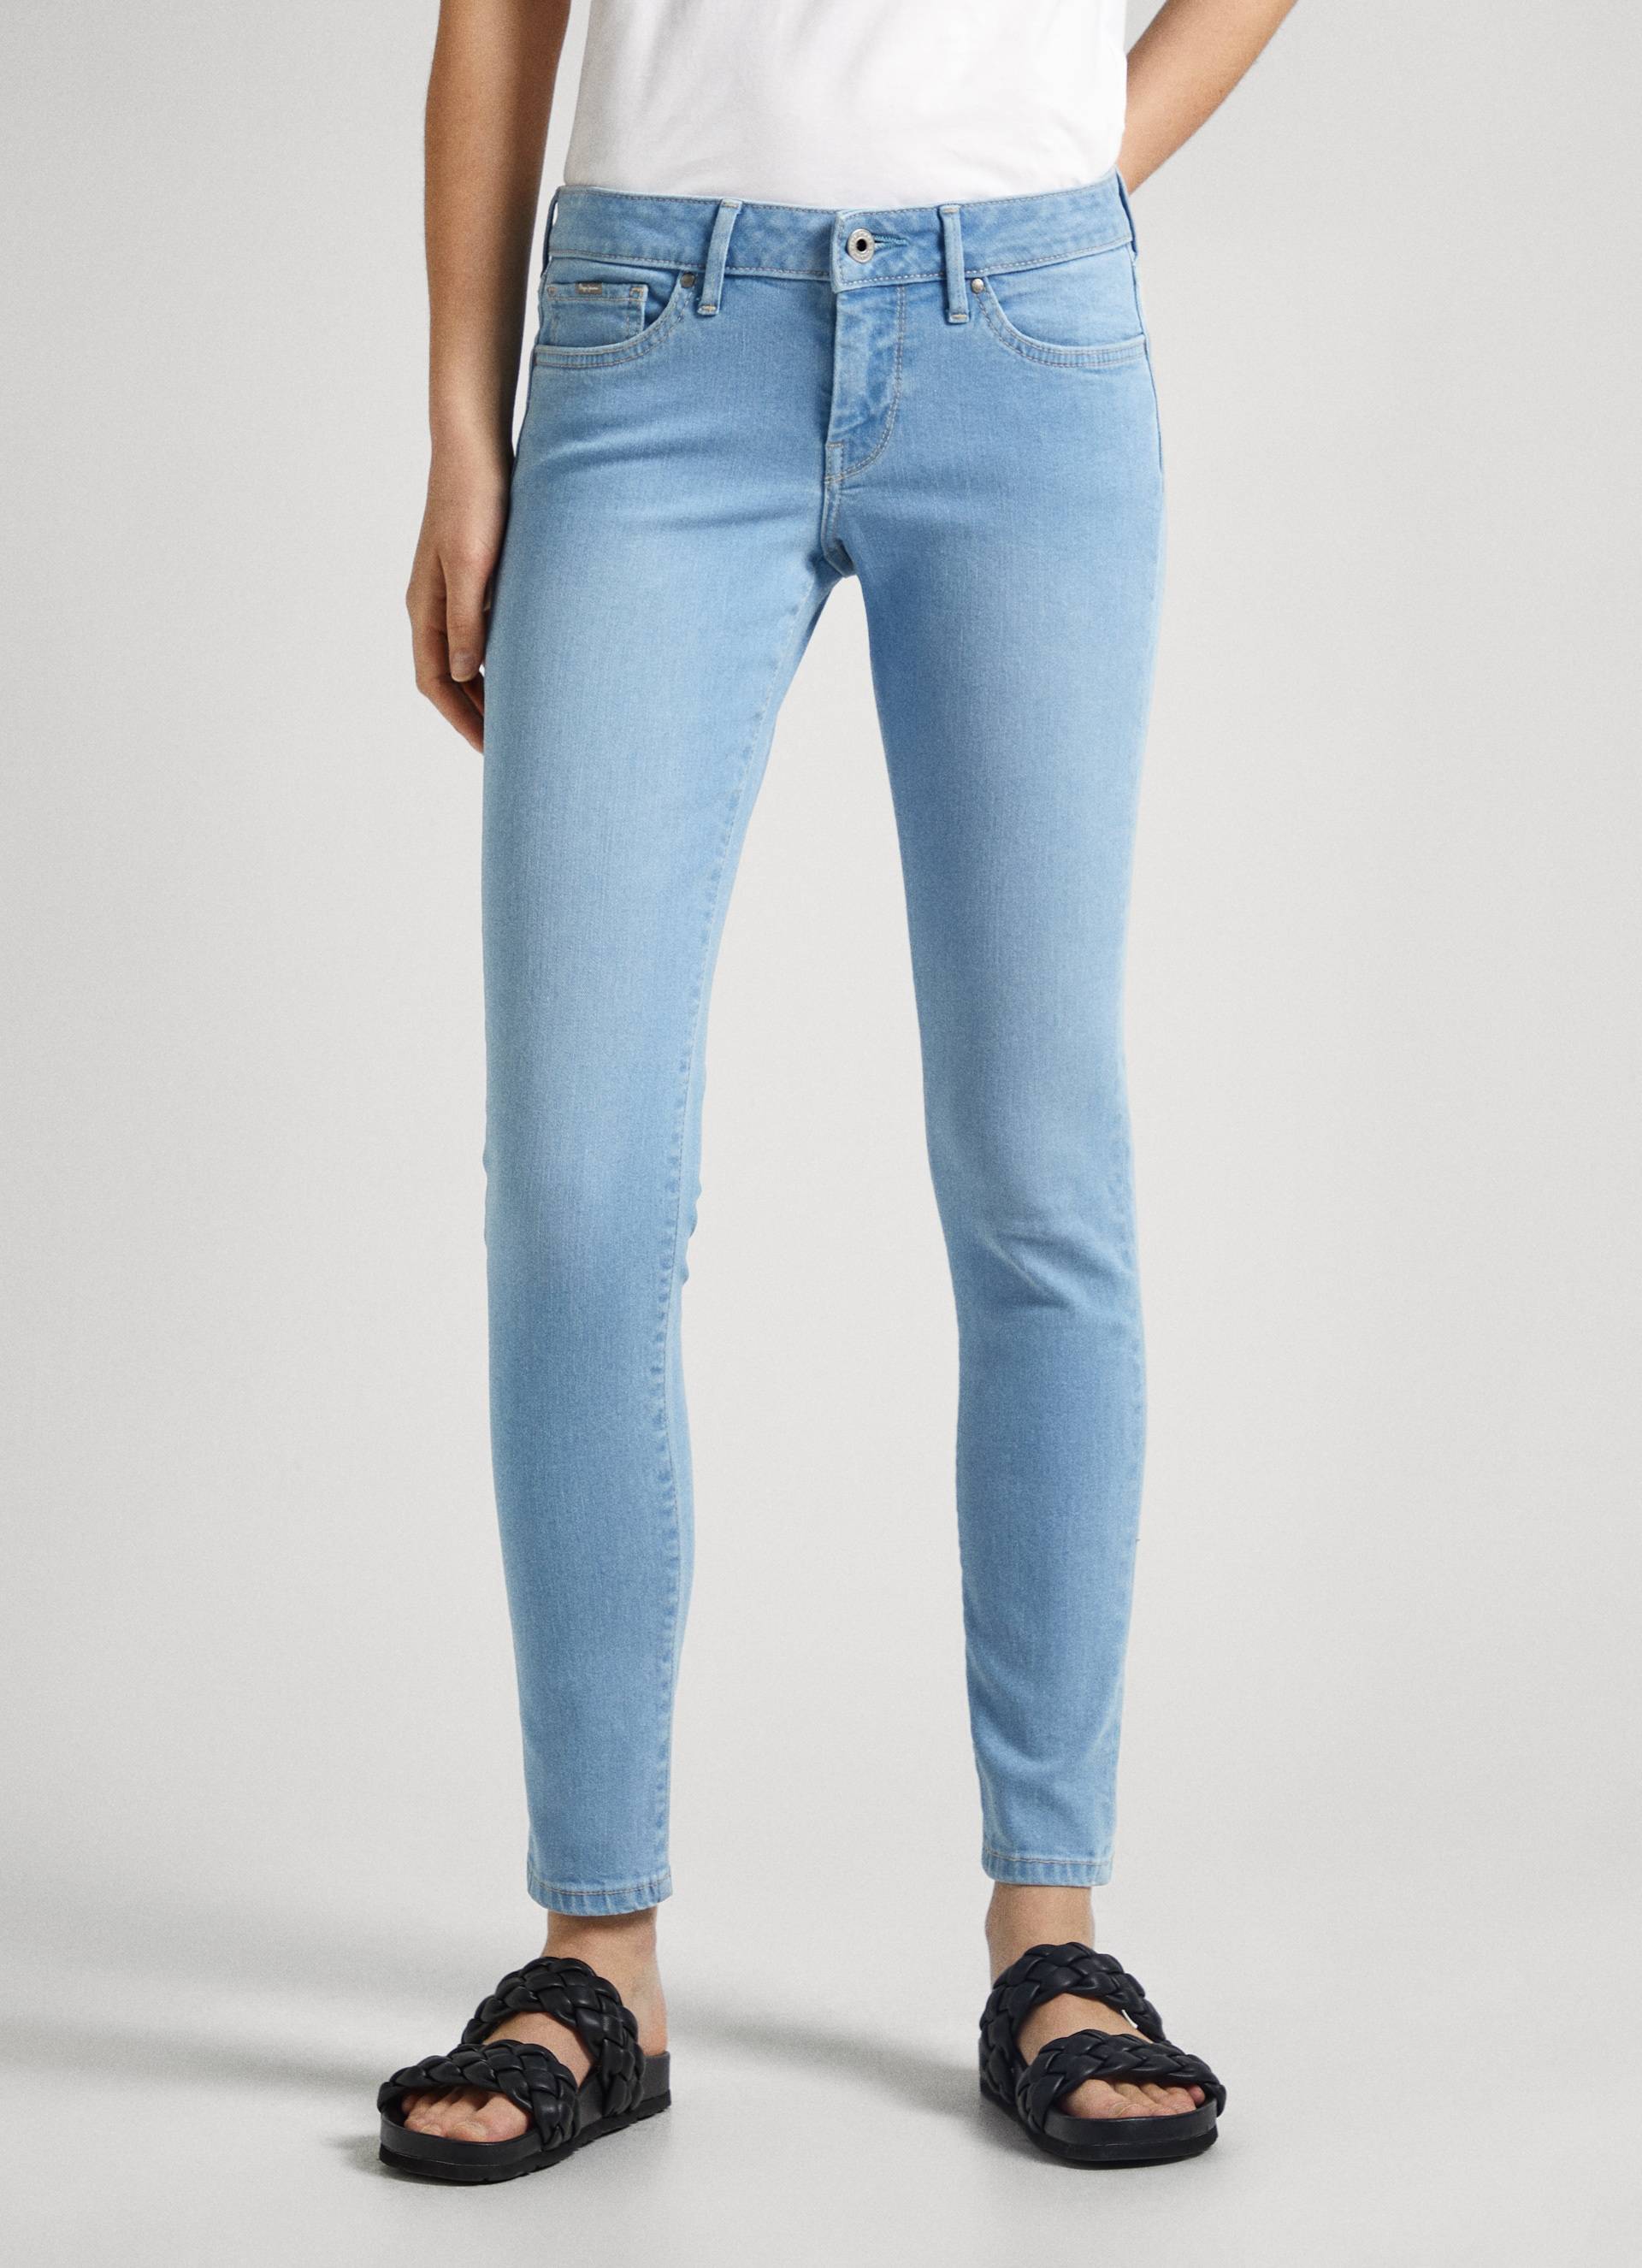 Pepe Jeans Skinny-fit-Jeans »SKINNY JEANS LW« von Pepe Jeans